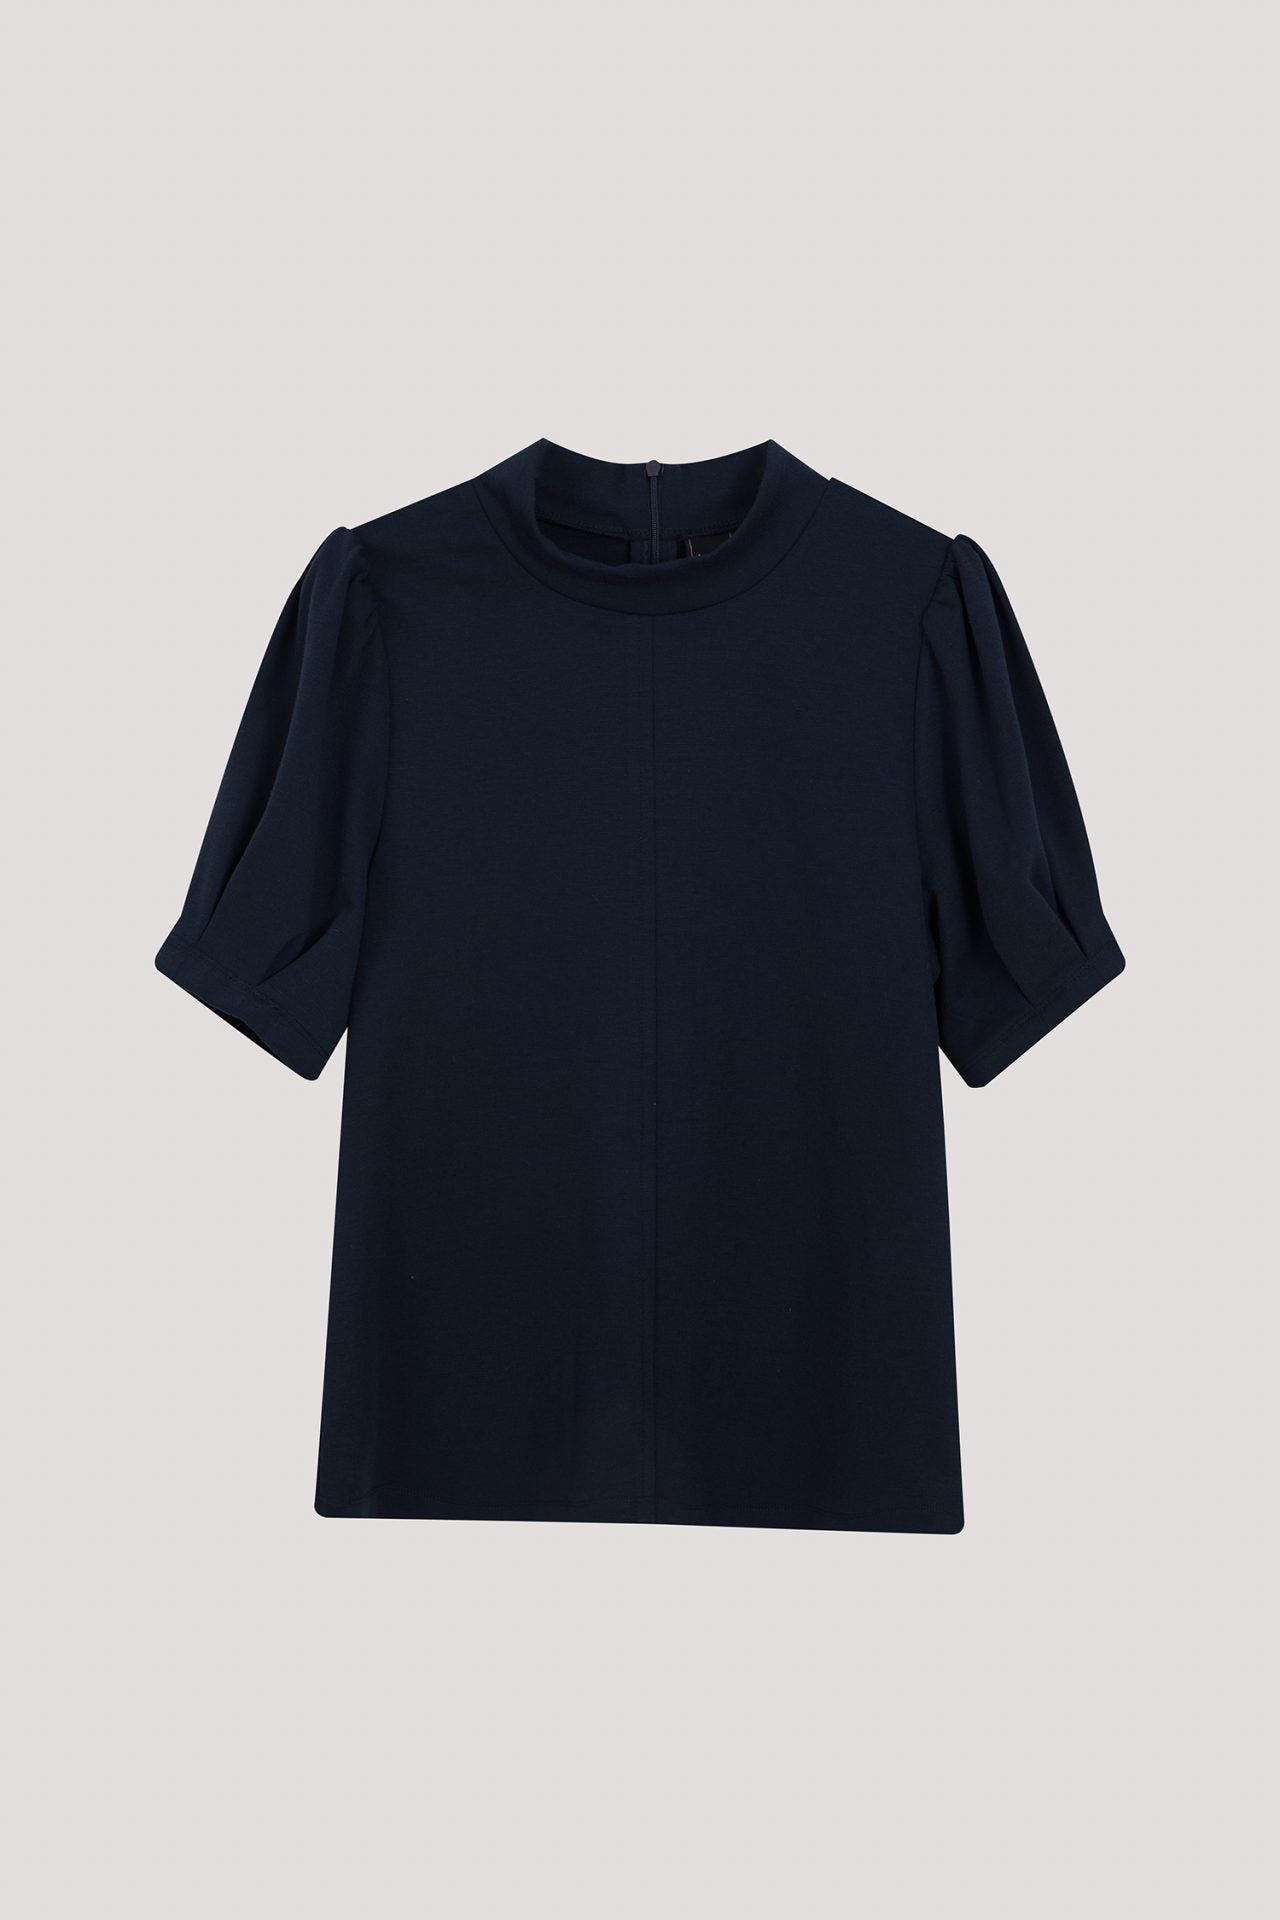 AT 10878 RUCHED SLEEVE TOP NAVY